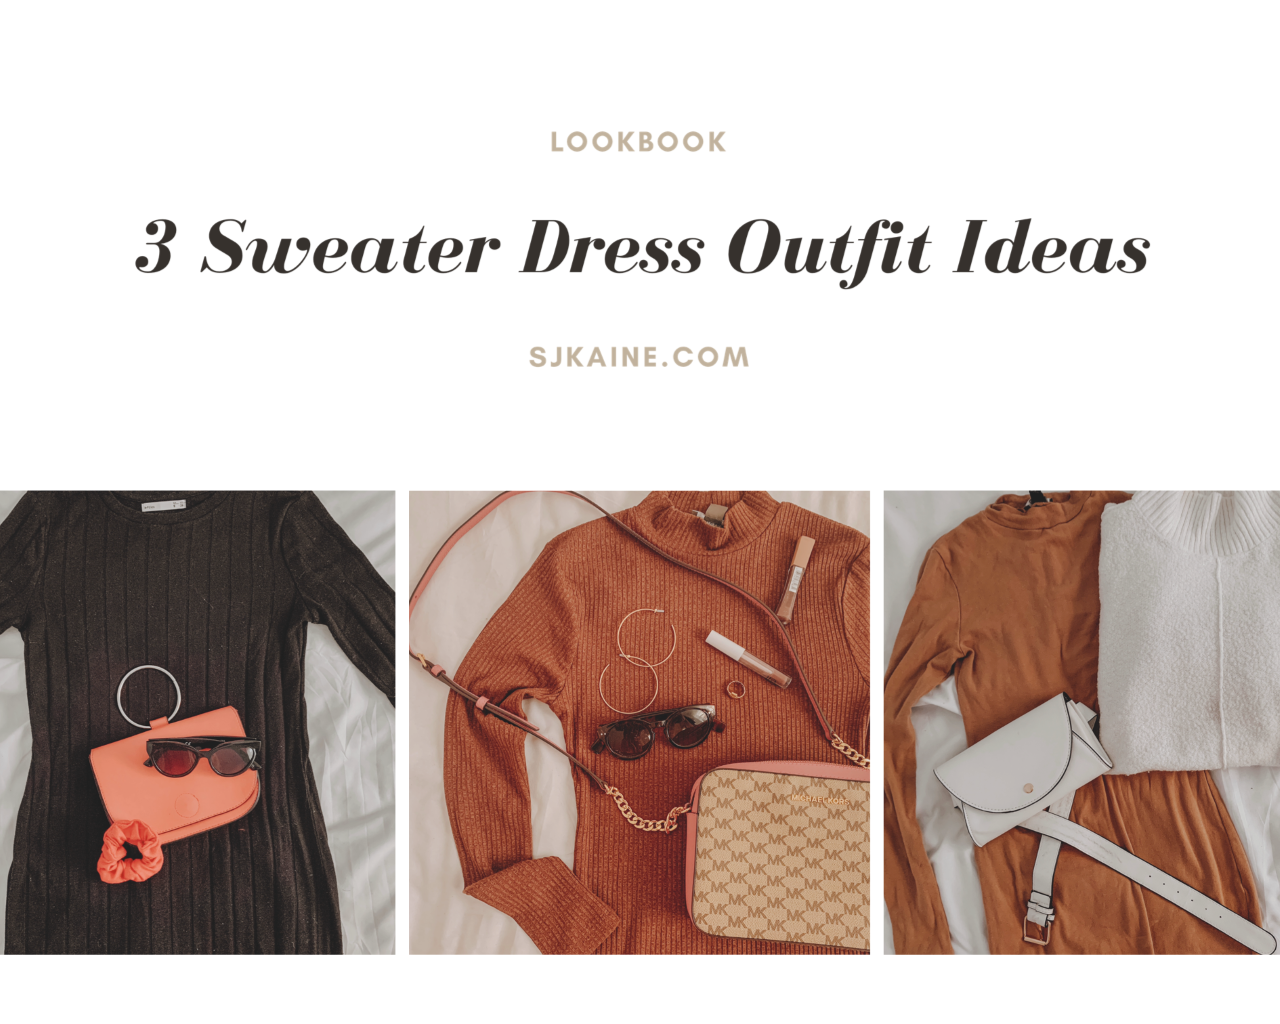 3 Stylish Sweater Dress Outfit Ideas For Women